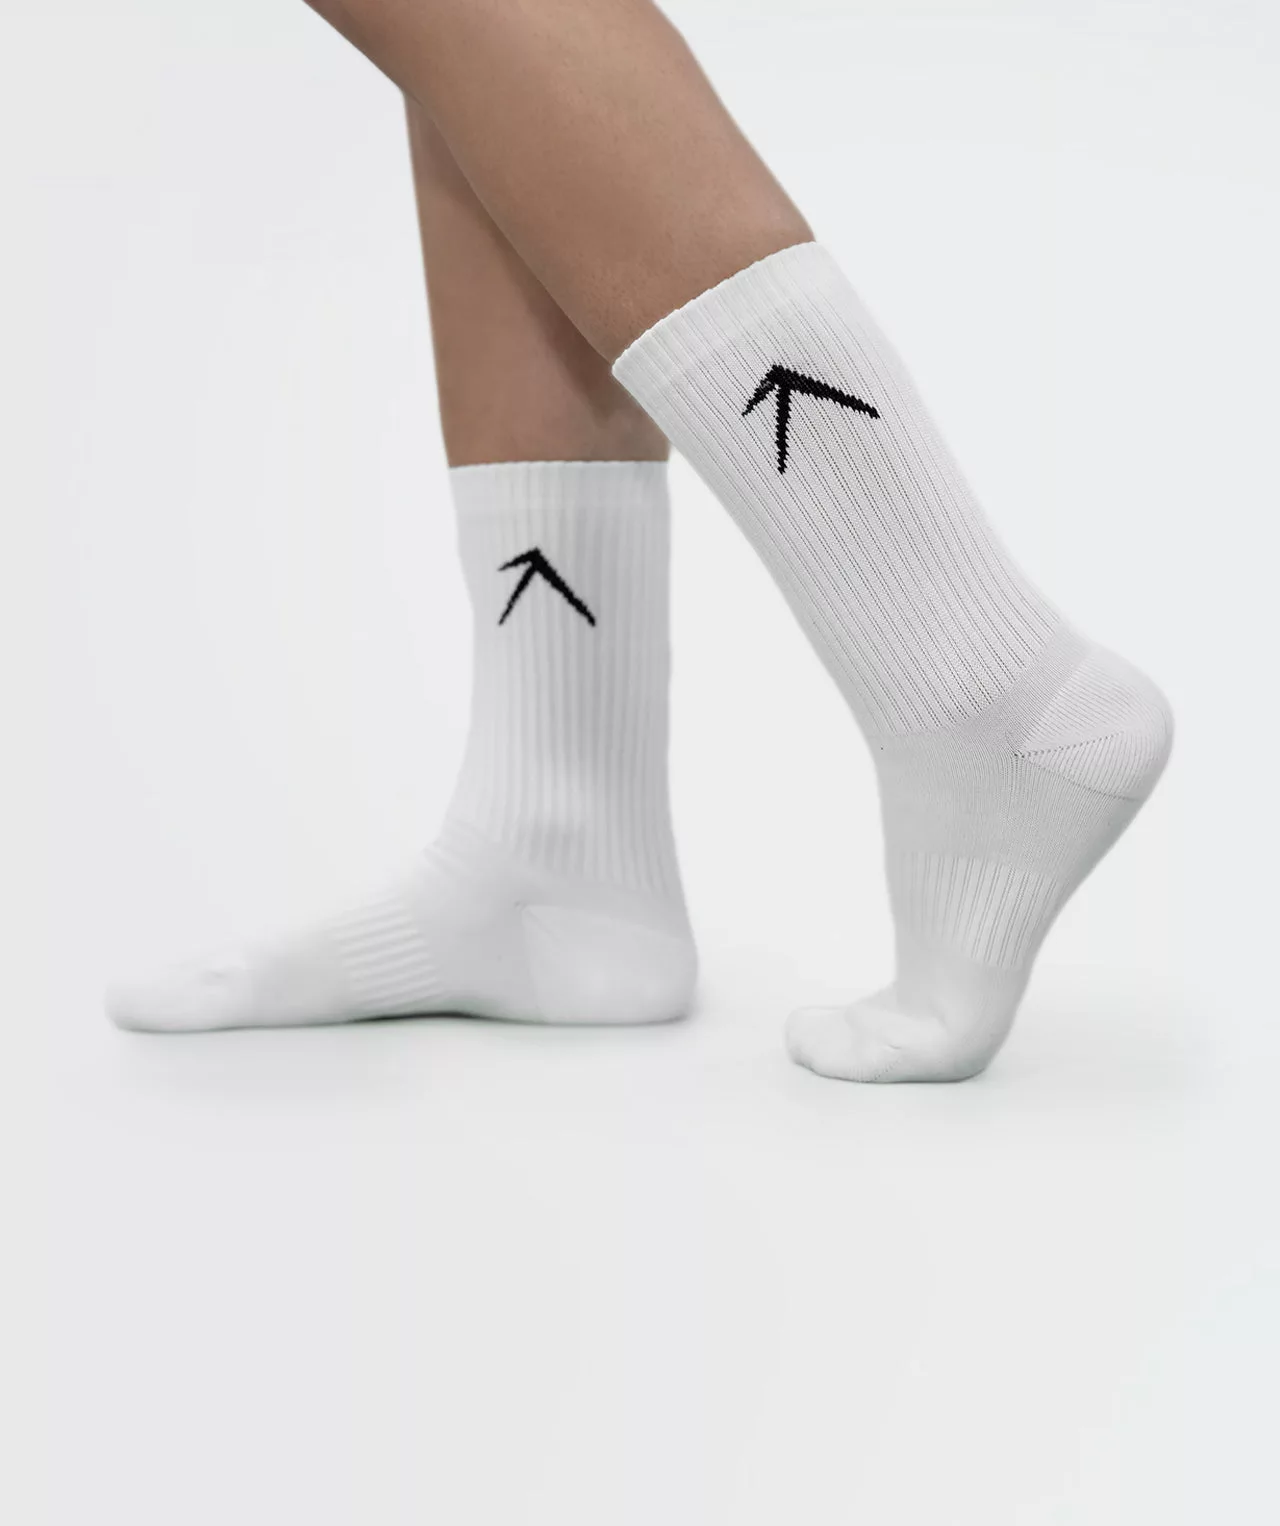 Unisex Crew Dry Touch Socks - Pack of 3 image 1